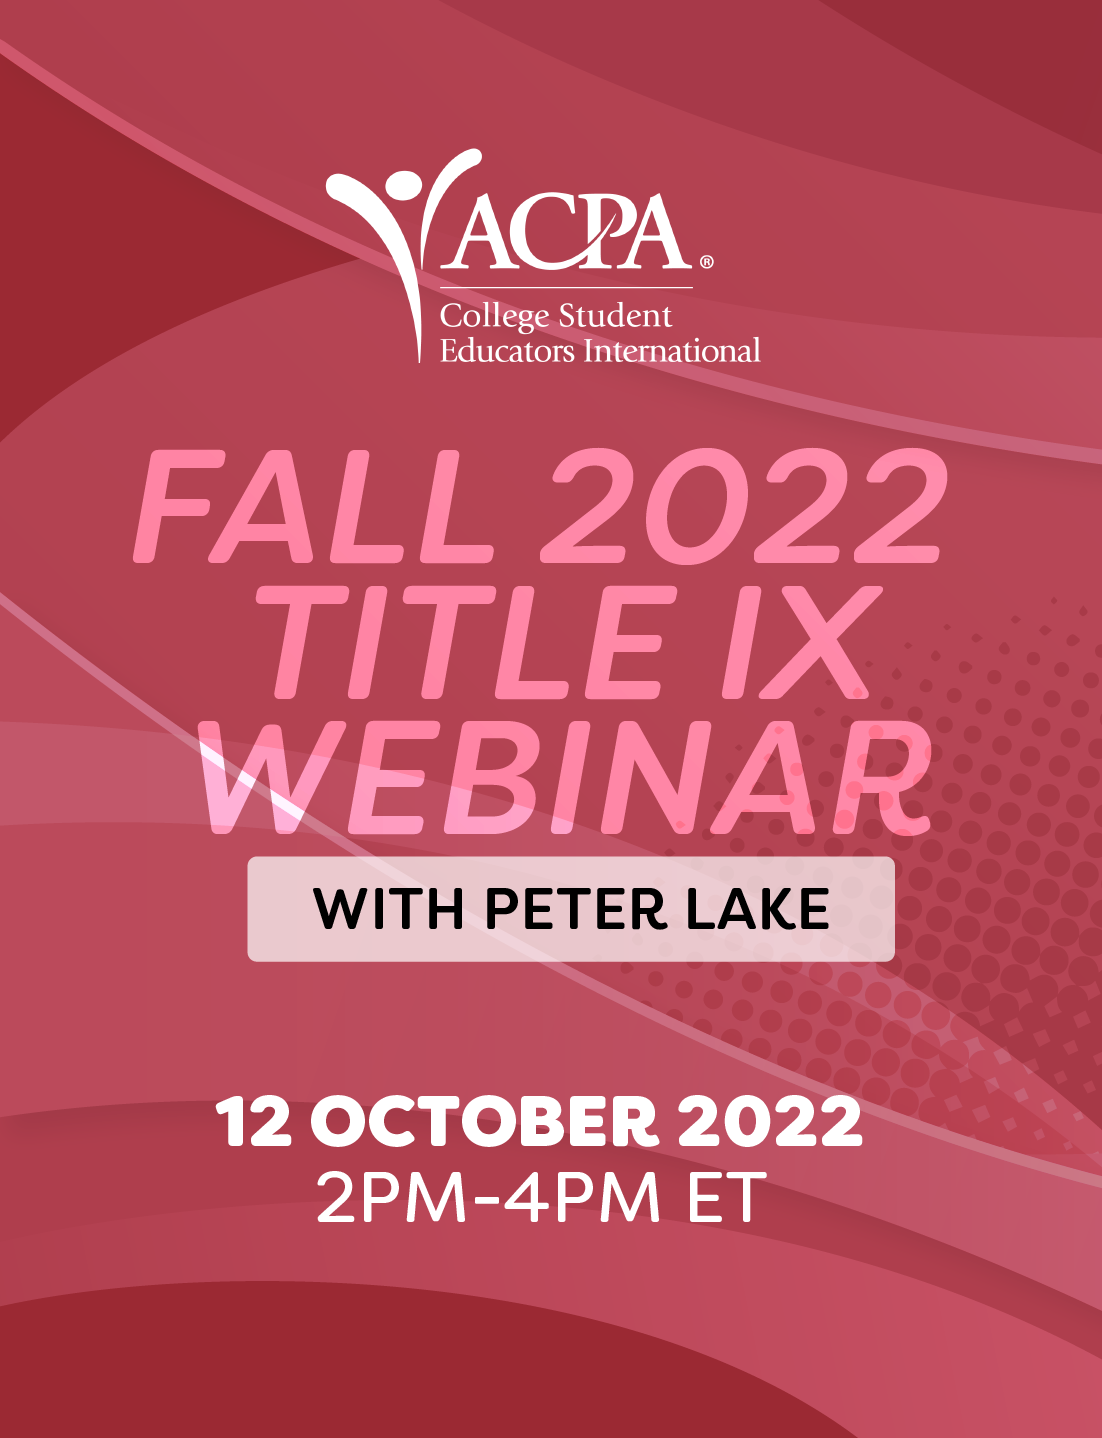 fall 2022 title ix webinar with peter lake. 12 october 2022 2-4pm ET